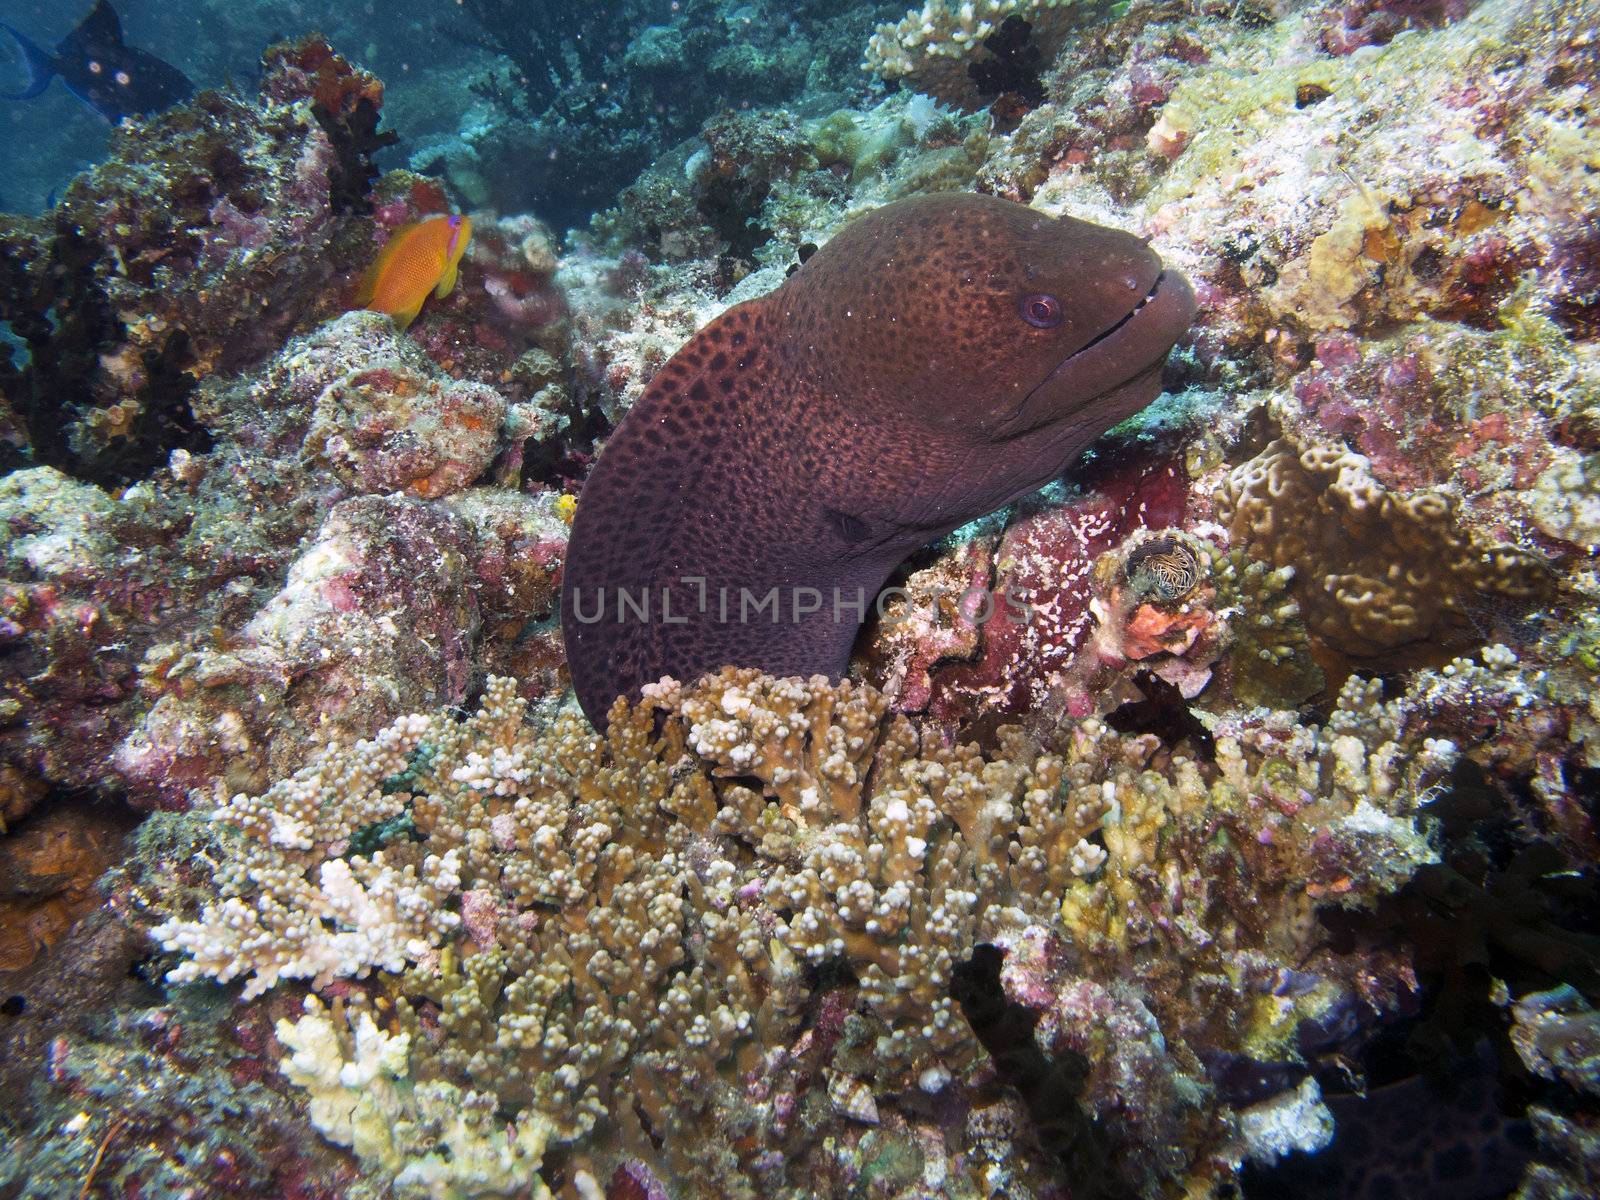 The giant moray is widespread in the Indo-Pacific region.  This is a large eel, reaching up to 300 cm (10.0 ft) in length and 30 kg (66.1 lbs) in weight.